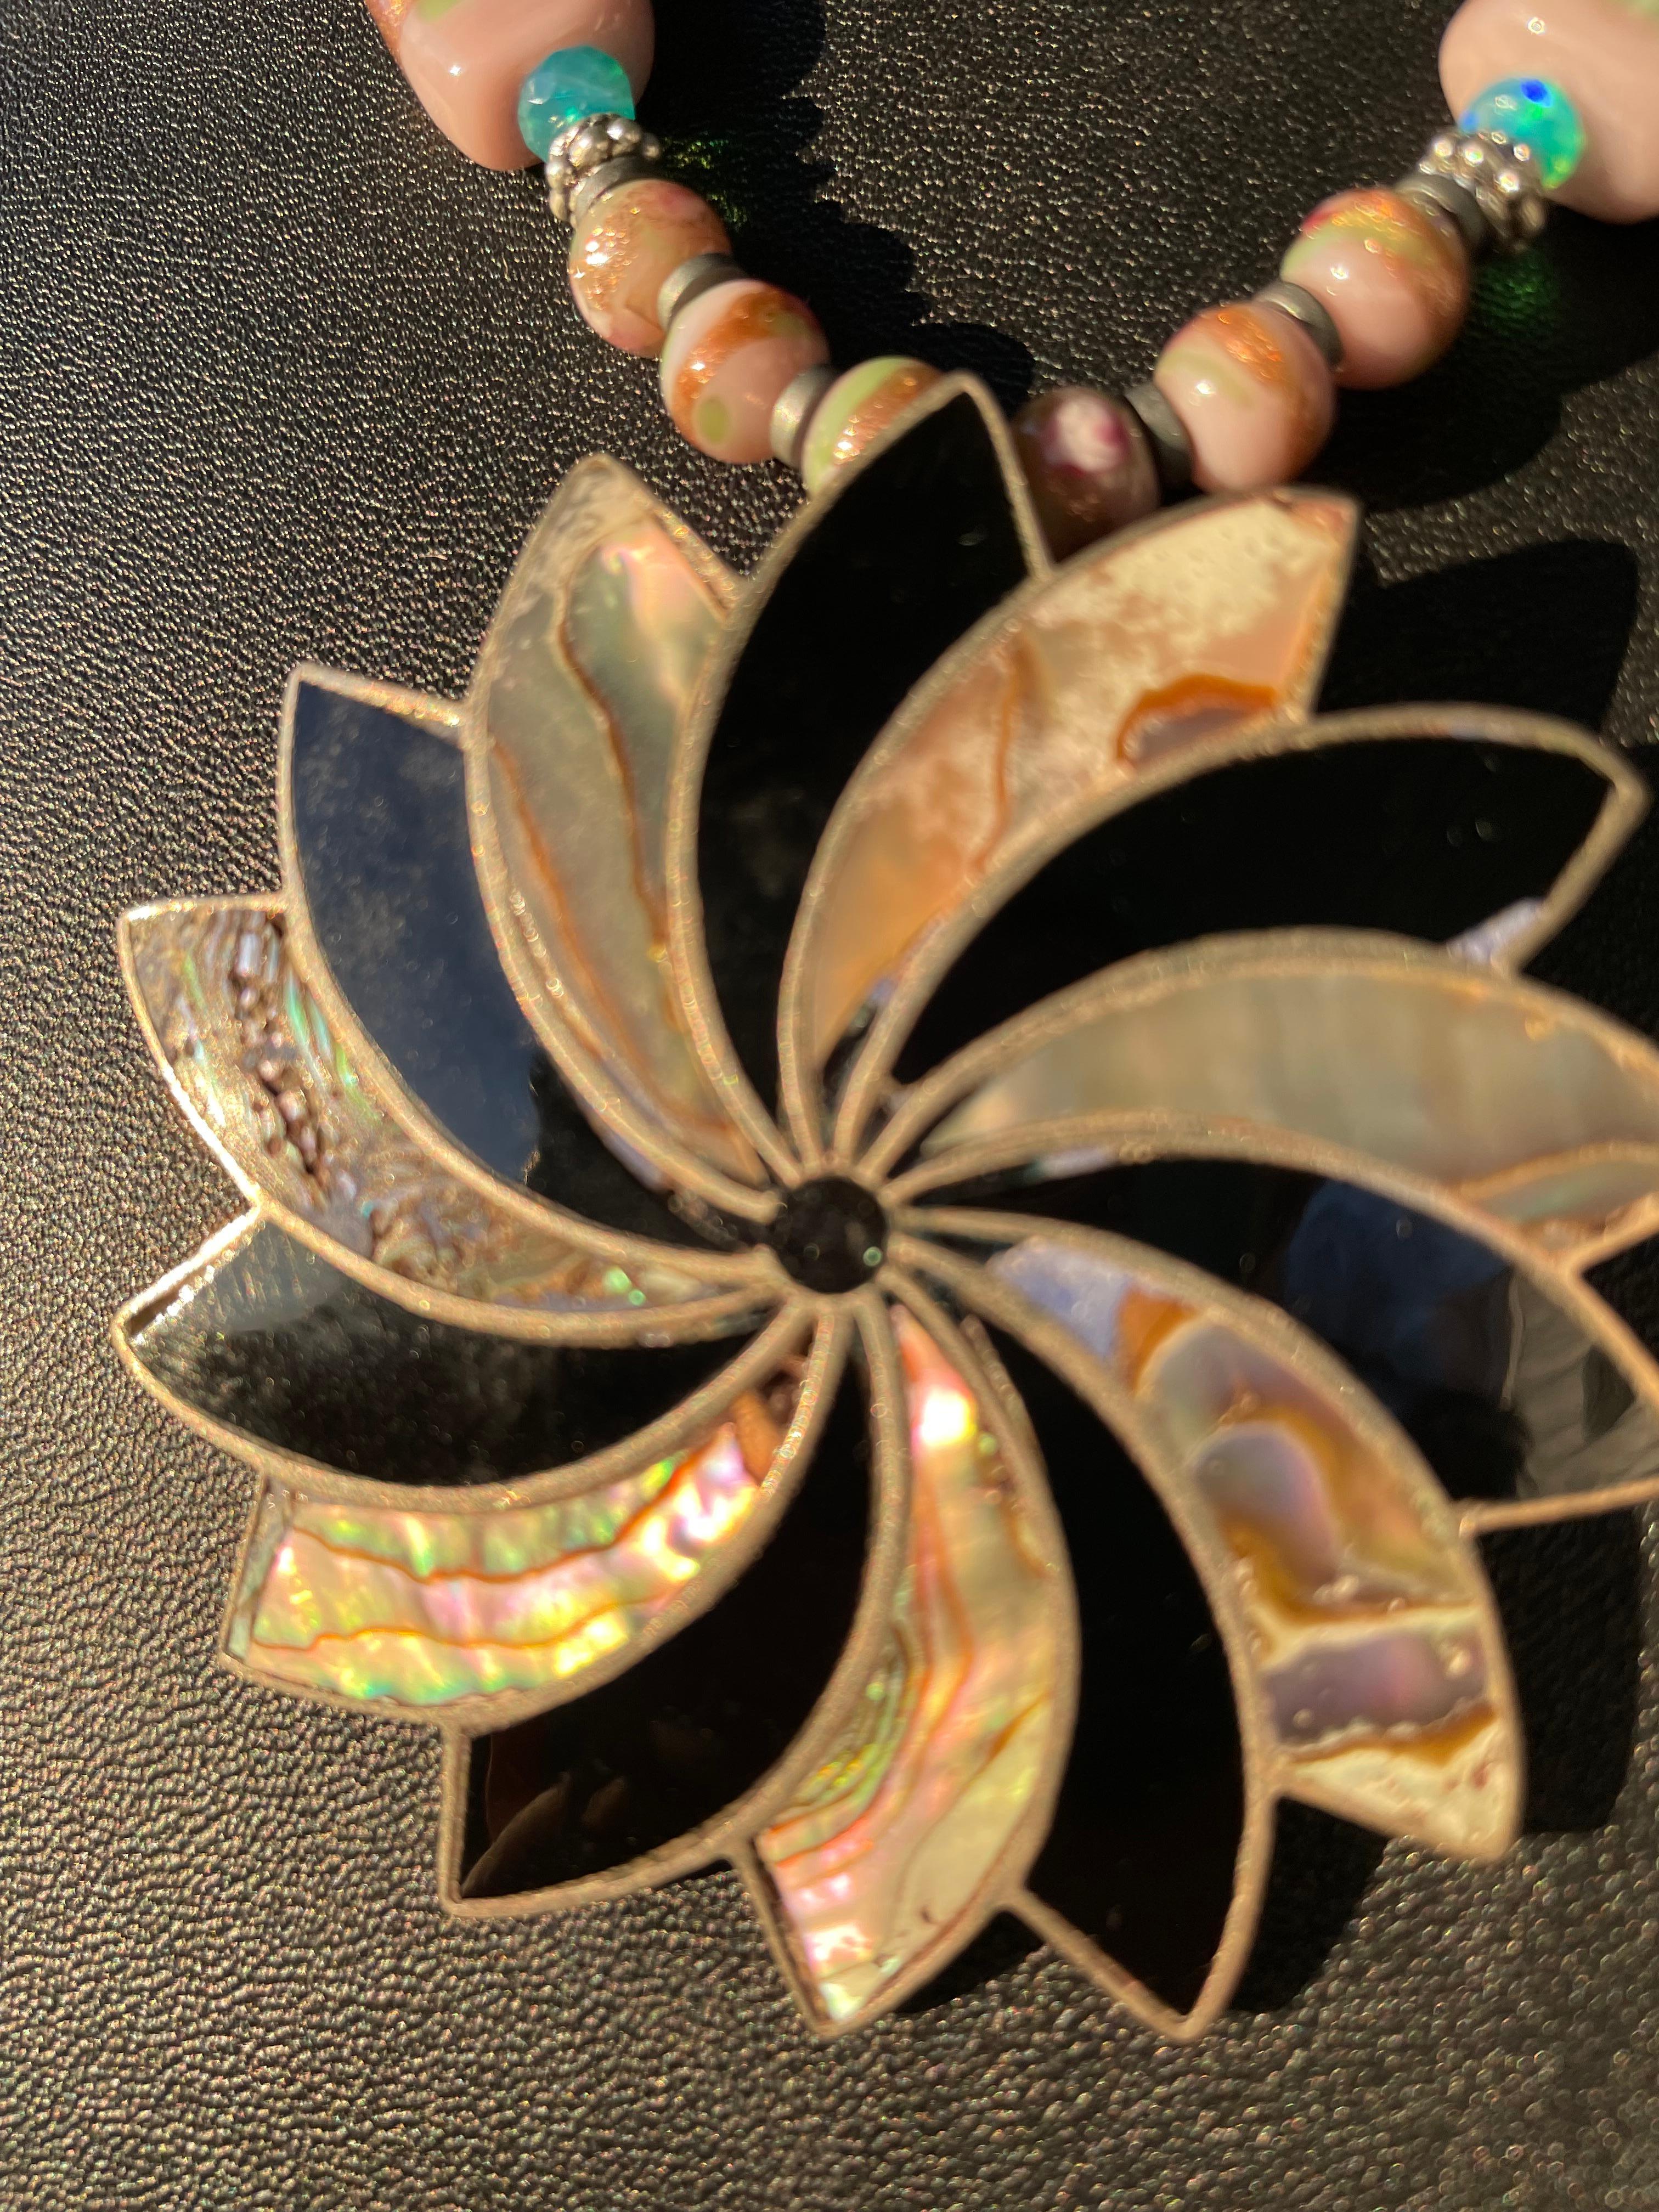 Lorraine’s Bijoux offers a Vintage Mexican,
Onyx,Sterling Silver, and Paua shell, mid 20th century pinwheel shape pendant necklace. This piece is stunning and very dramatic and represents the spinning of the wheel of life. Enhancing this amazing